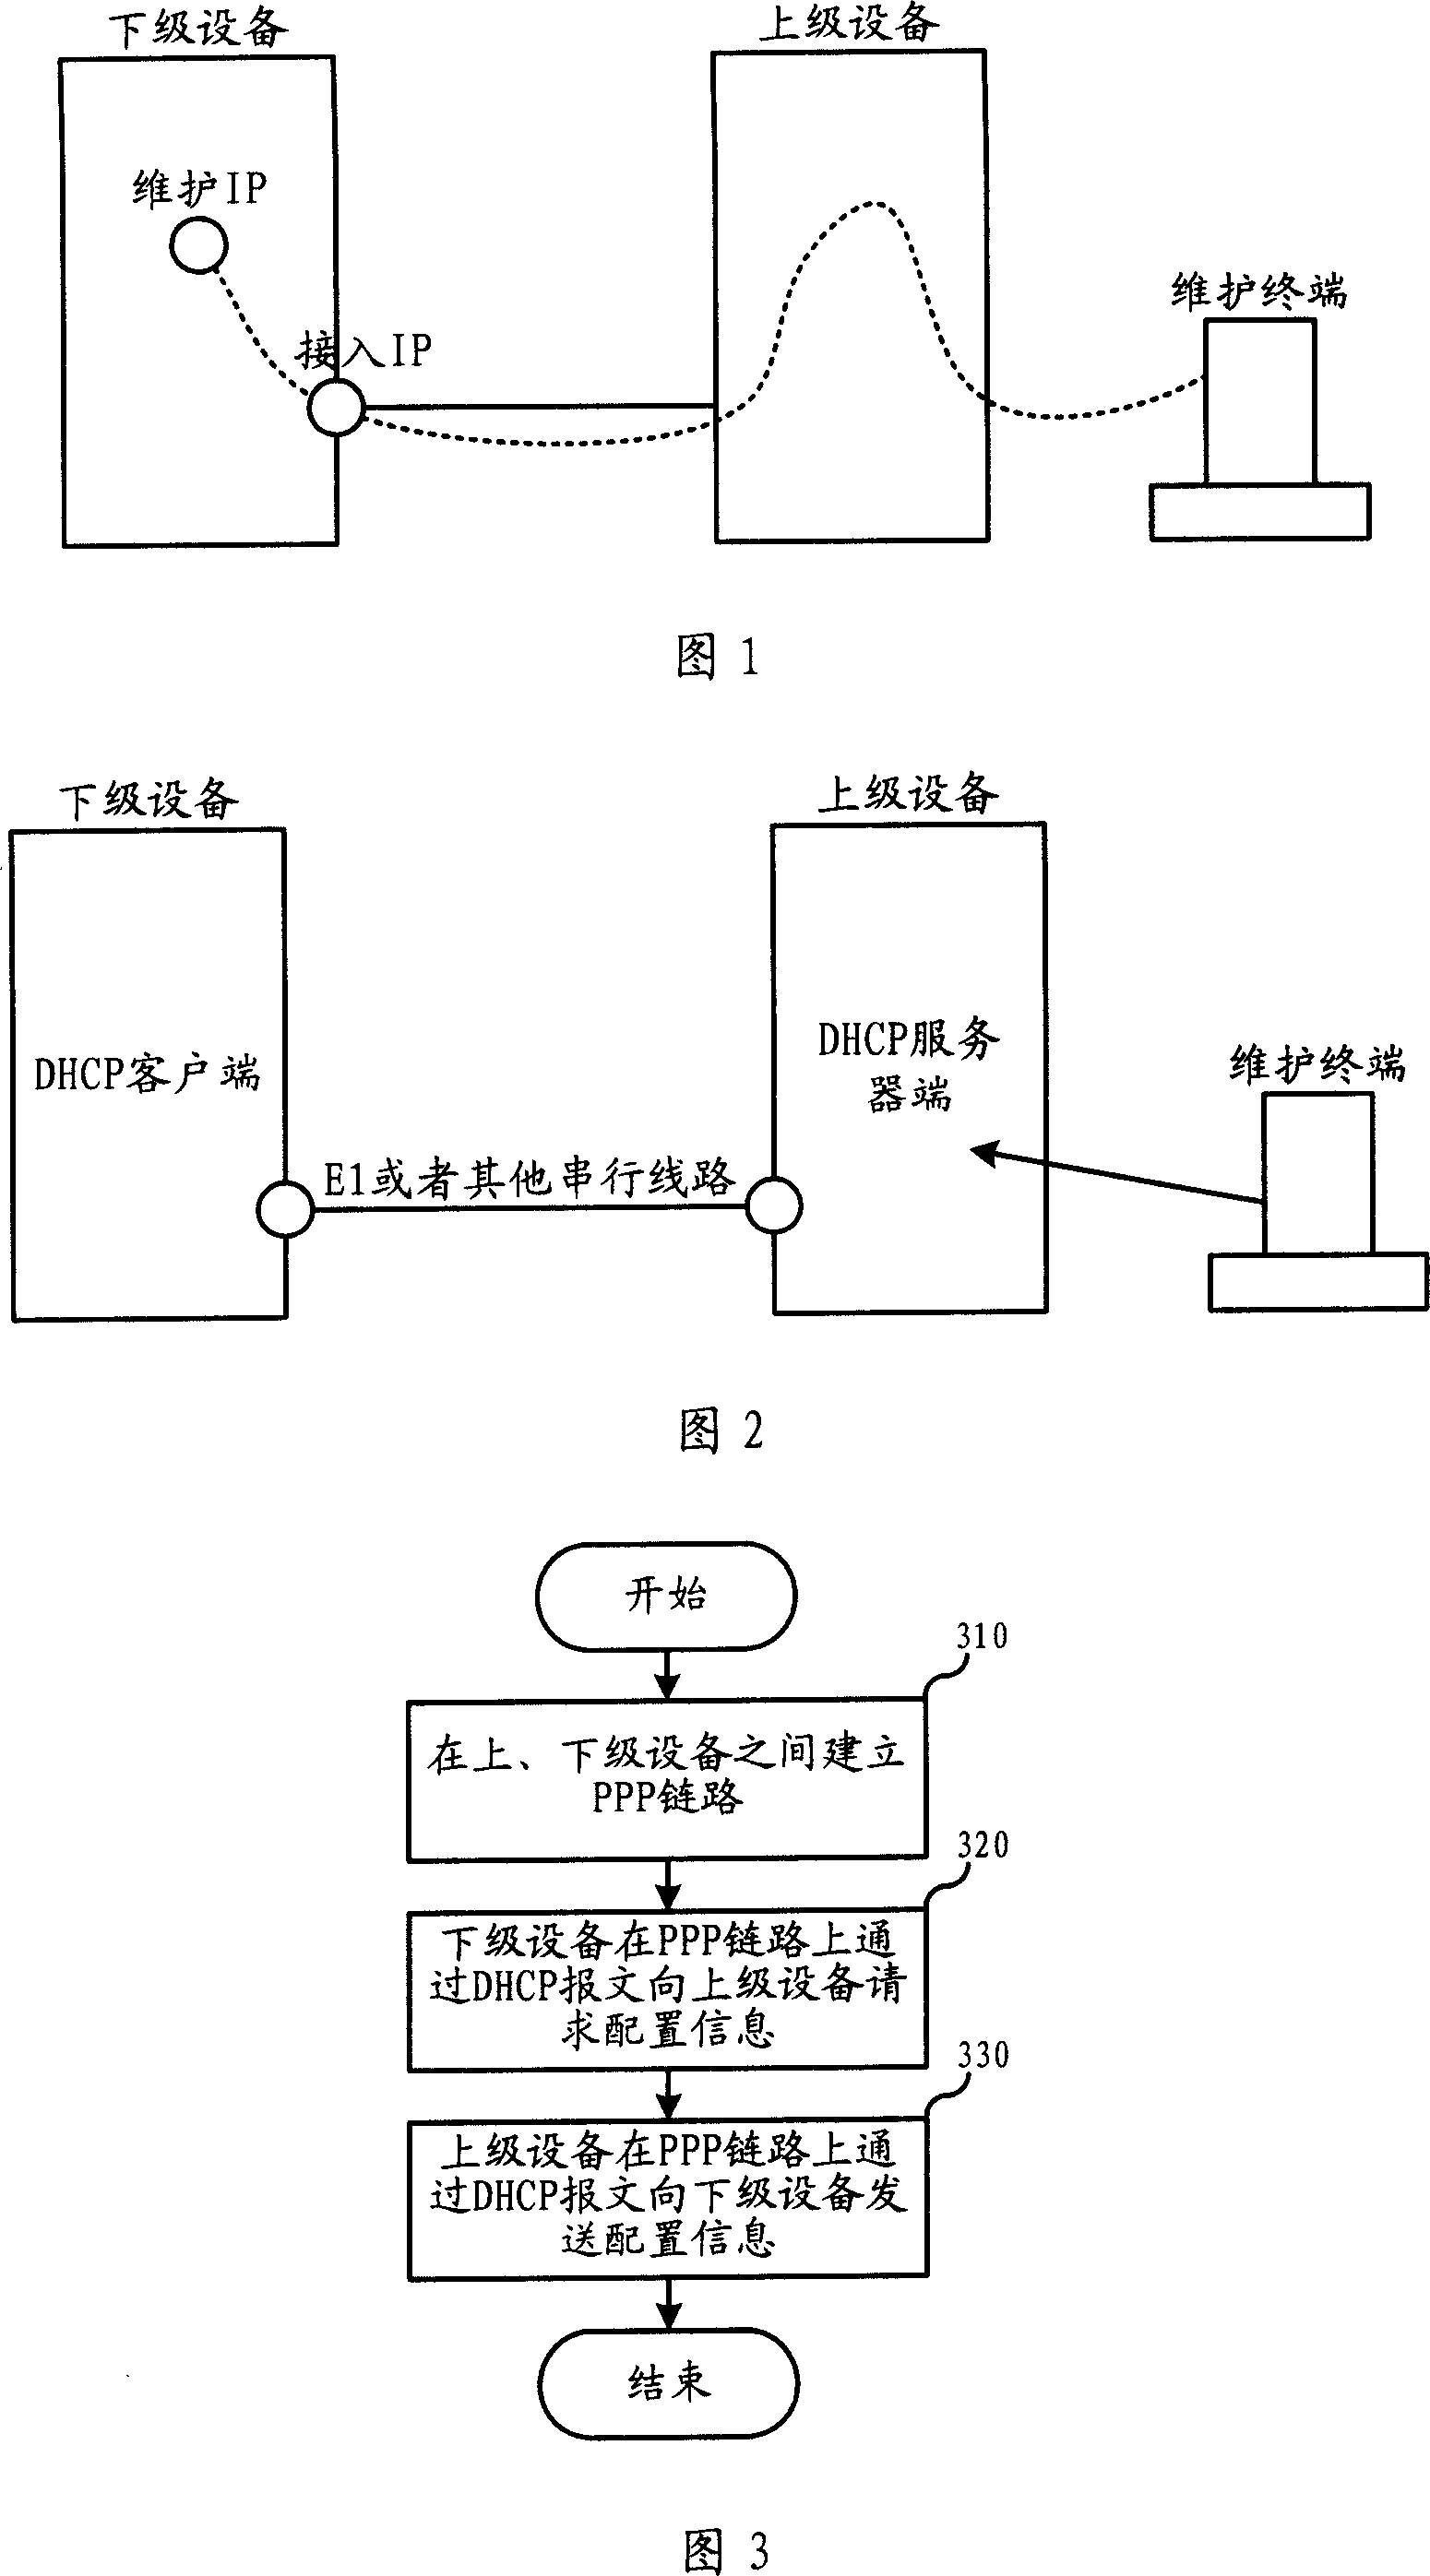 Method and system for sending DHCP message and obtaining configuration information by PPP line